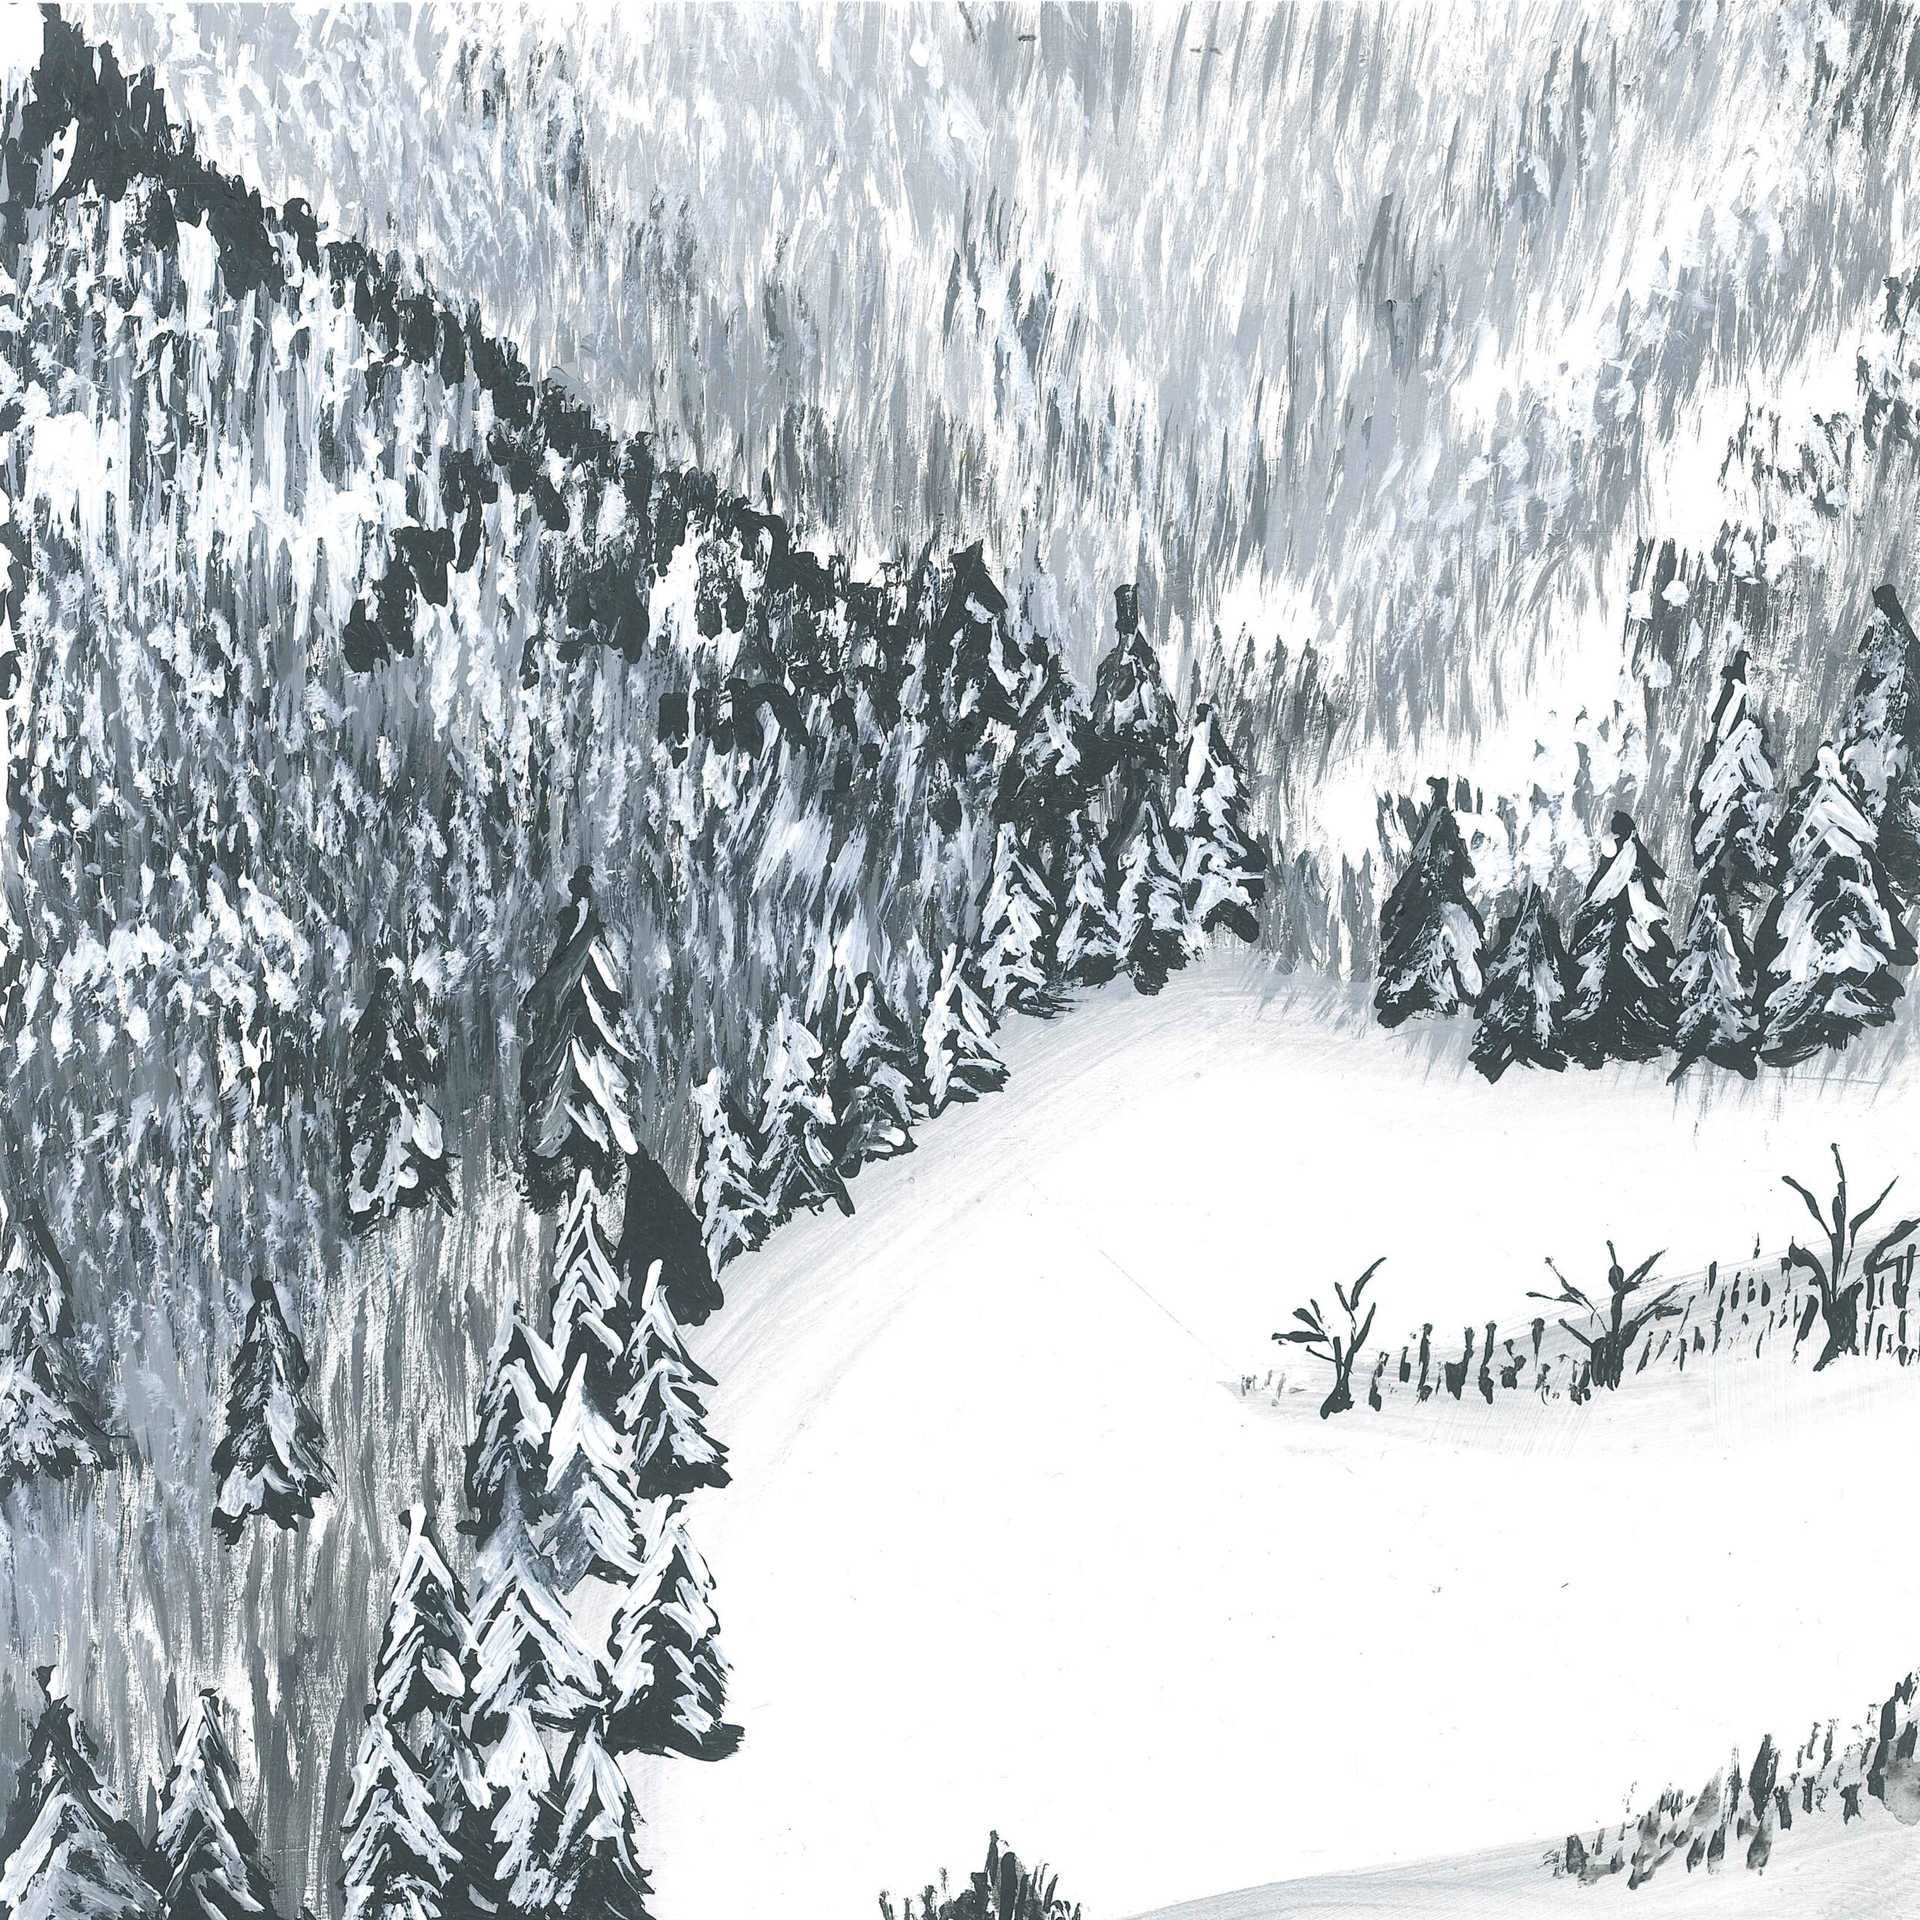 Winter Wind in Snowy Forest - nature landscape painting - earth.fm